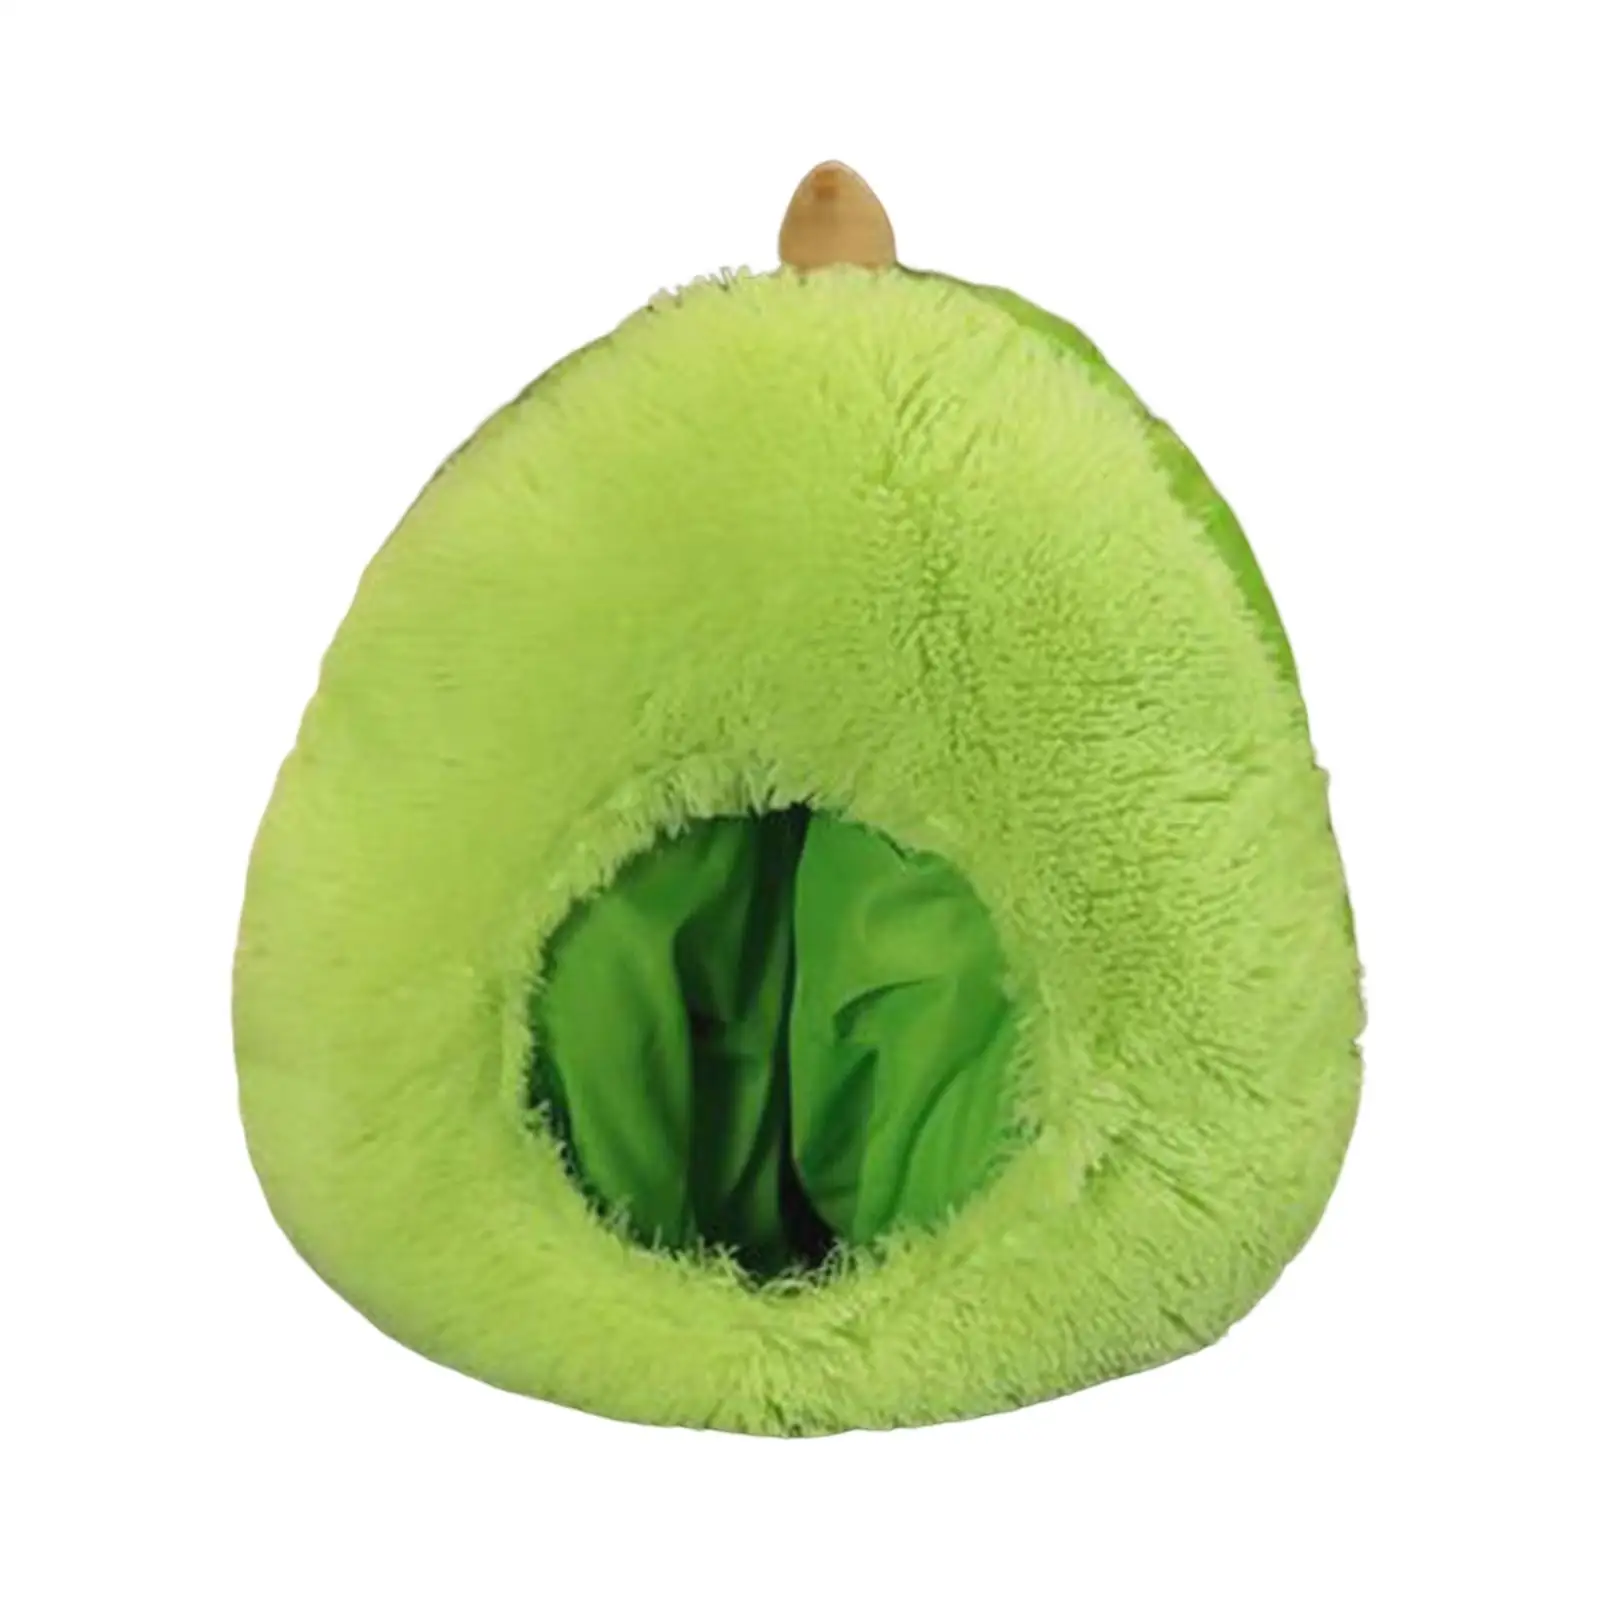 Plush Doll Fruit Headgear Hat Stuffed Cap Sleeping Pillow Toy Photo Props Warm Cosplay Costume Accessory Head Cover for Teens